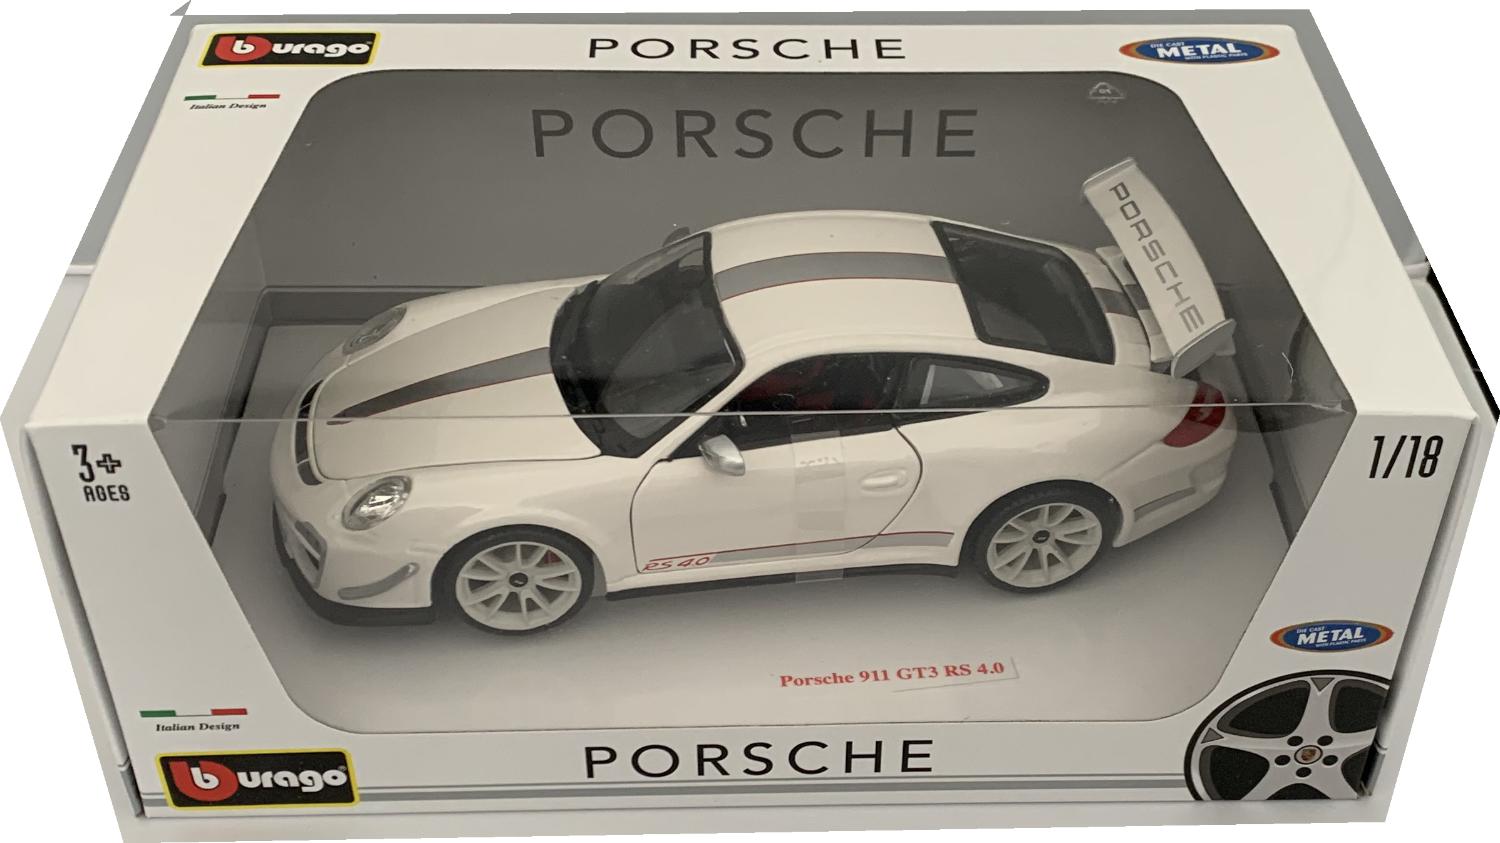 An excellent scale model of the Porsche 911 GTS RS 4.0 with high level of detail throughout, all authentically recreated. Model is presented in a window display box. The car is approx. 24 cm long and the presentation box is 30 cm long